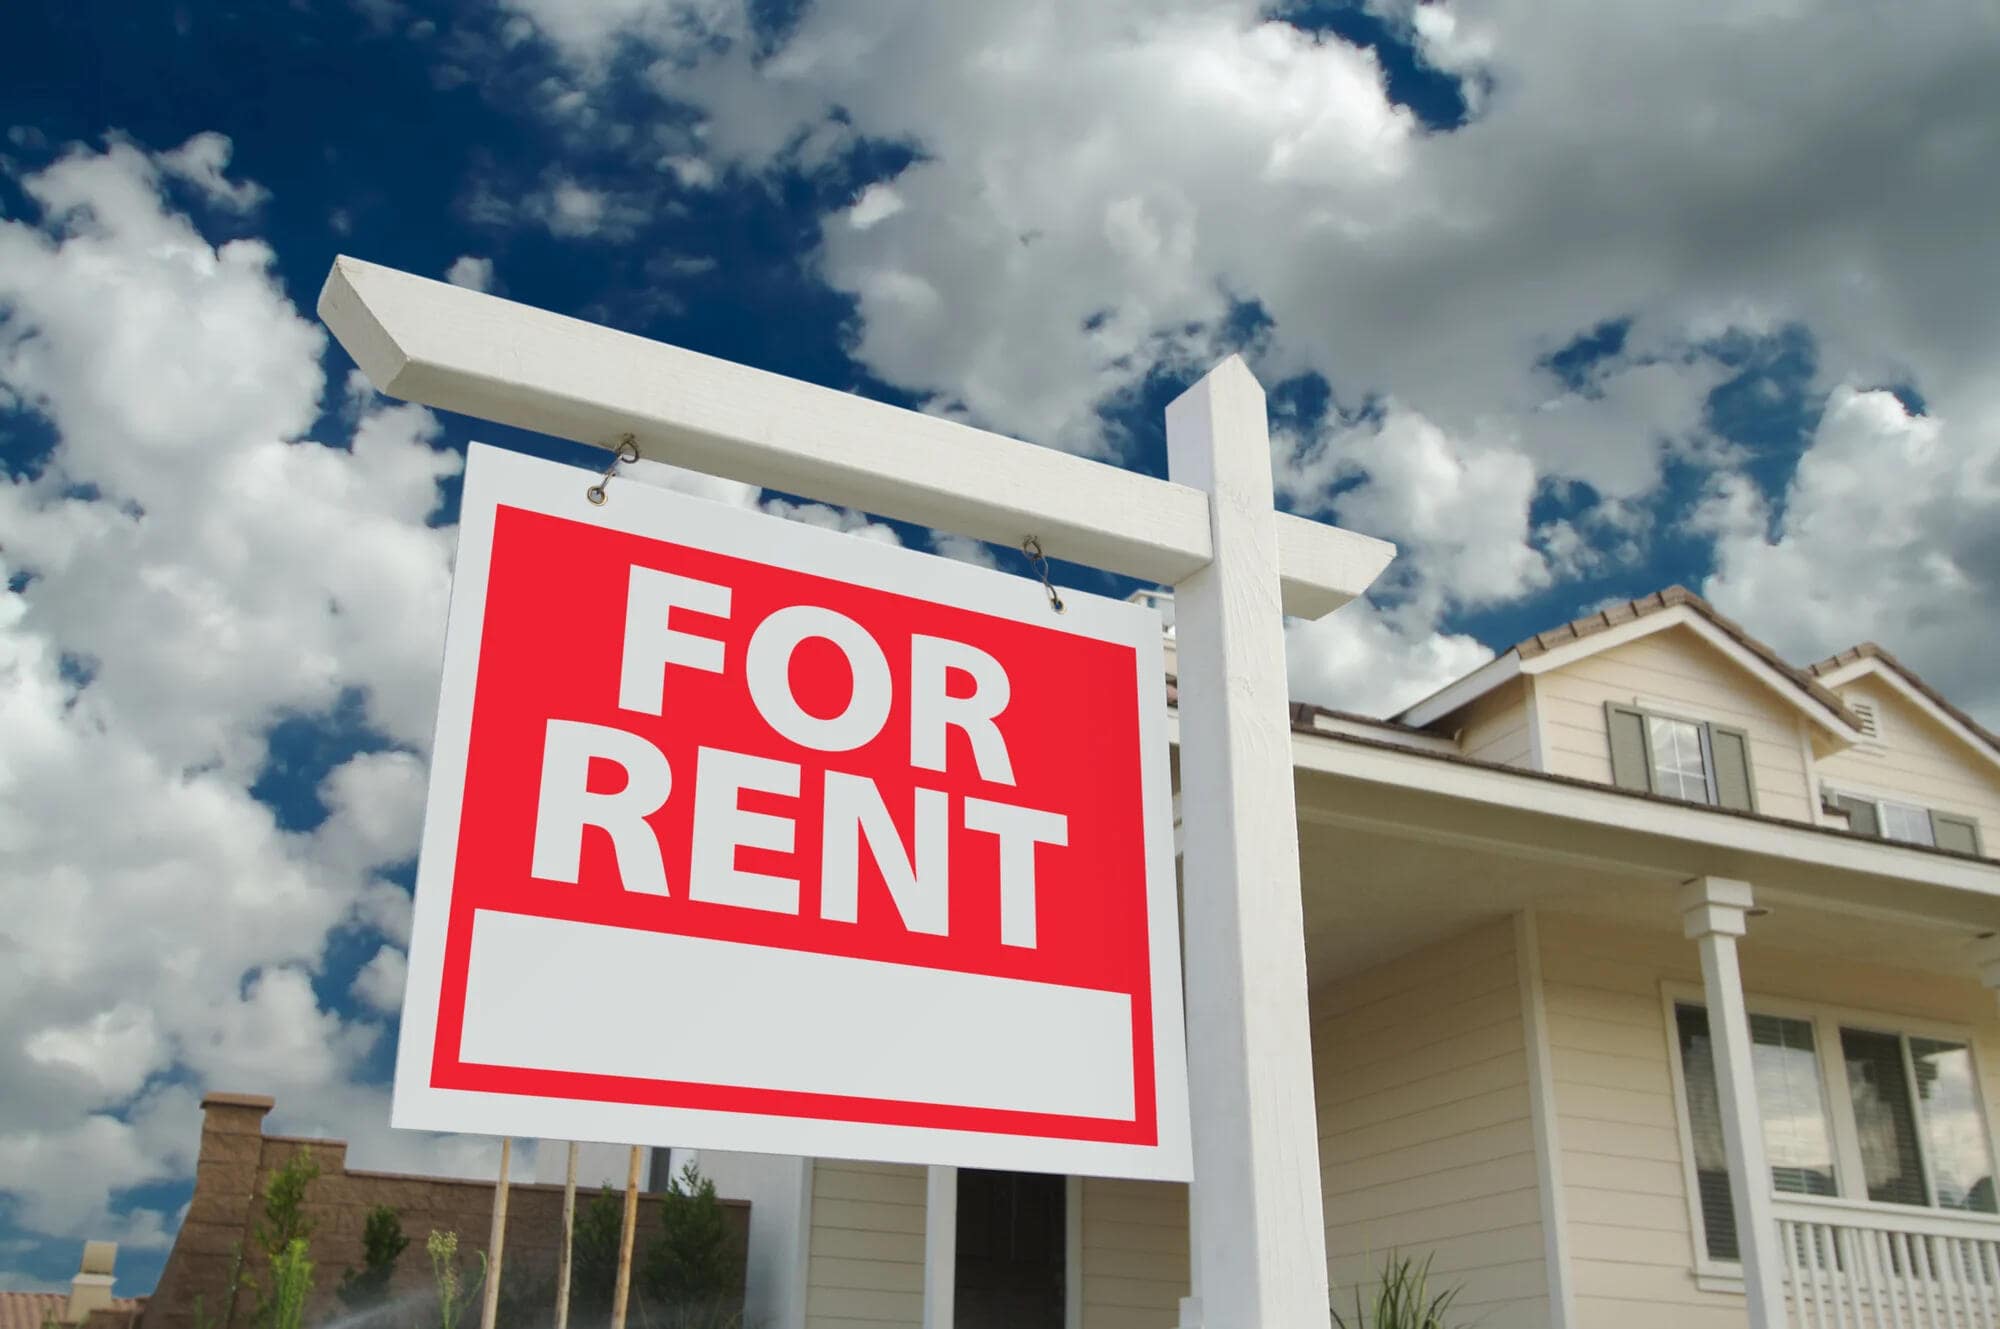 Houses for Rent: Your Ultimate Guide to Finding the Perfect Rental